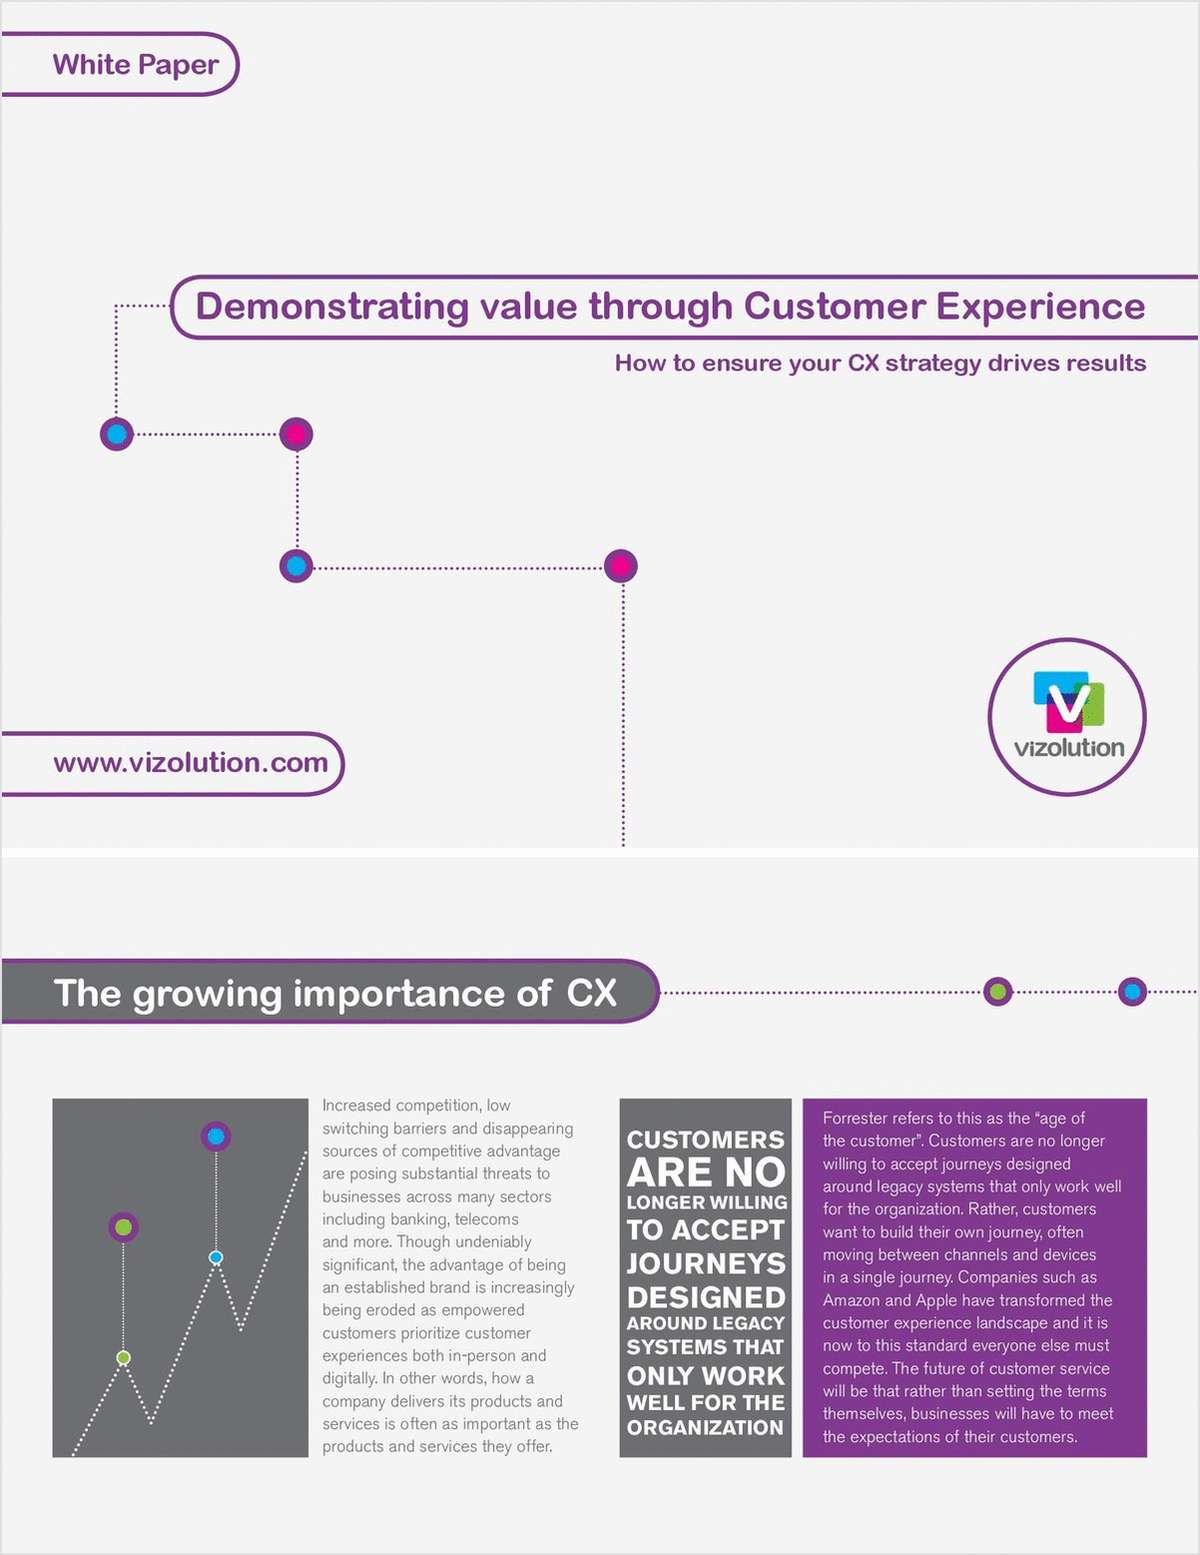 Demonstrating Value Through Customer Experience - US